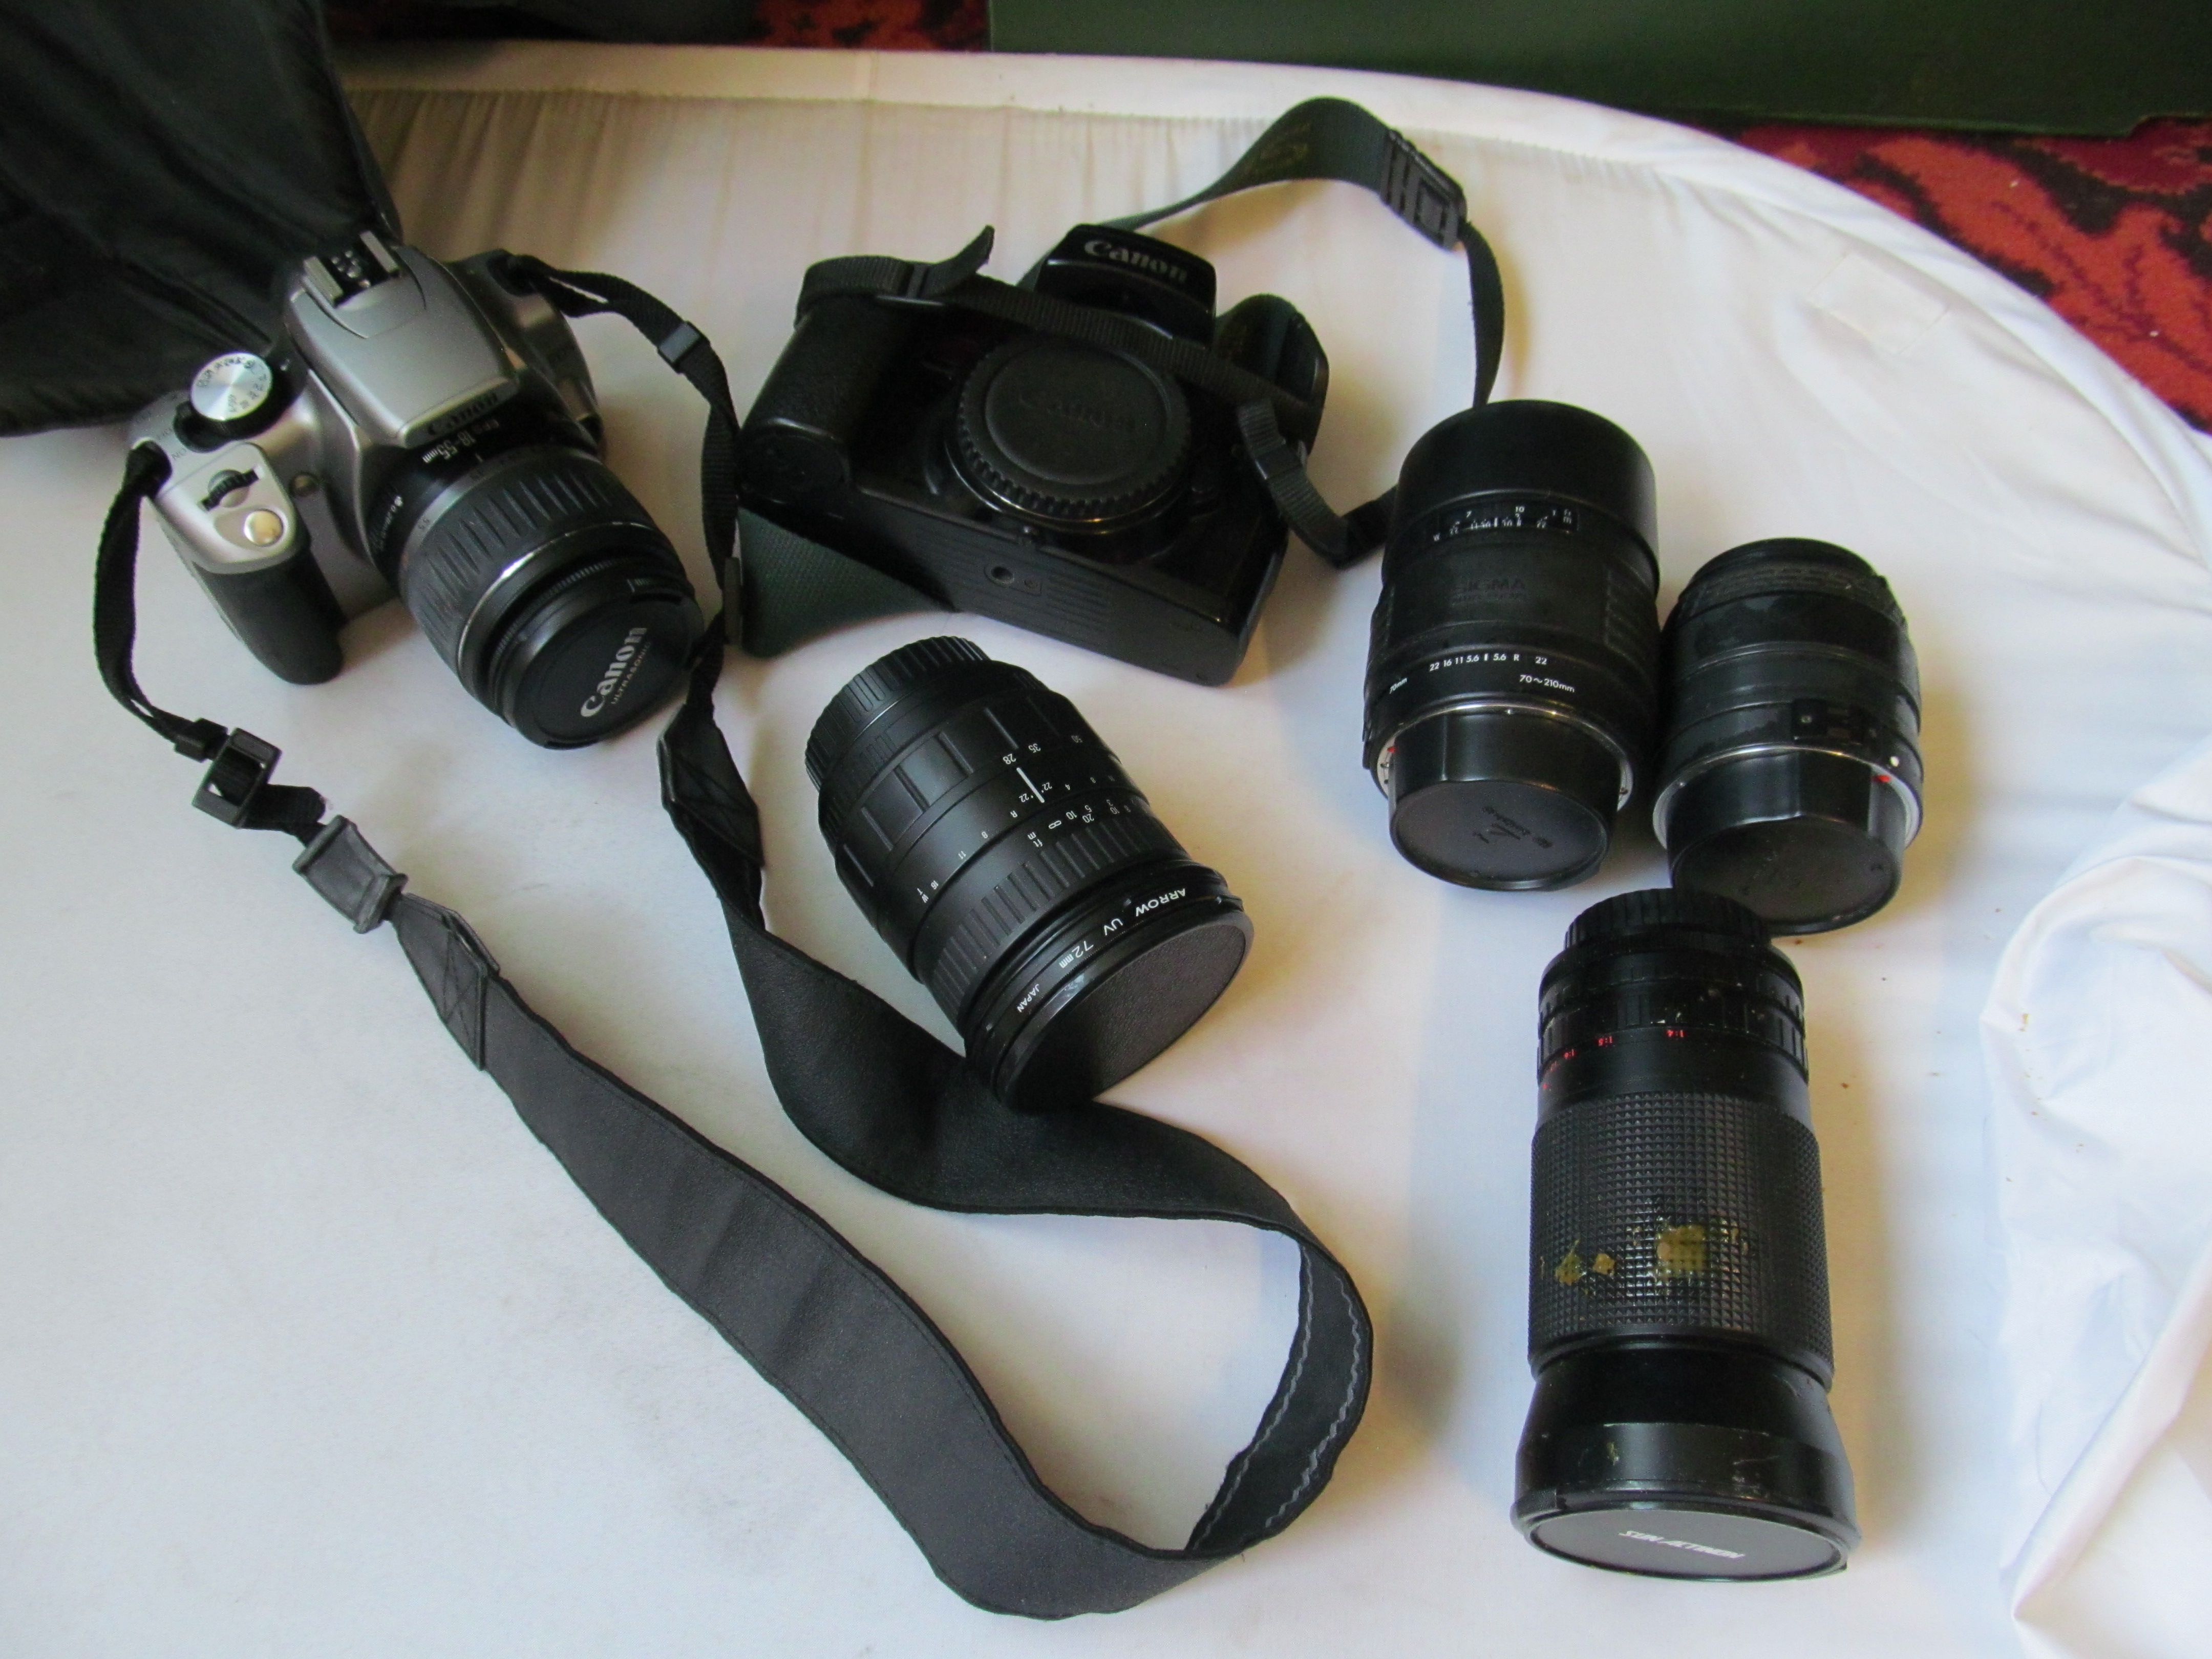 A Canon EOS with lens and older EOS camera, six lenses, filters, tripod et cetera